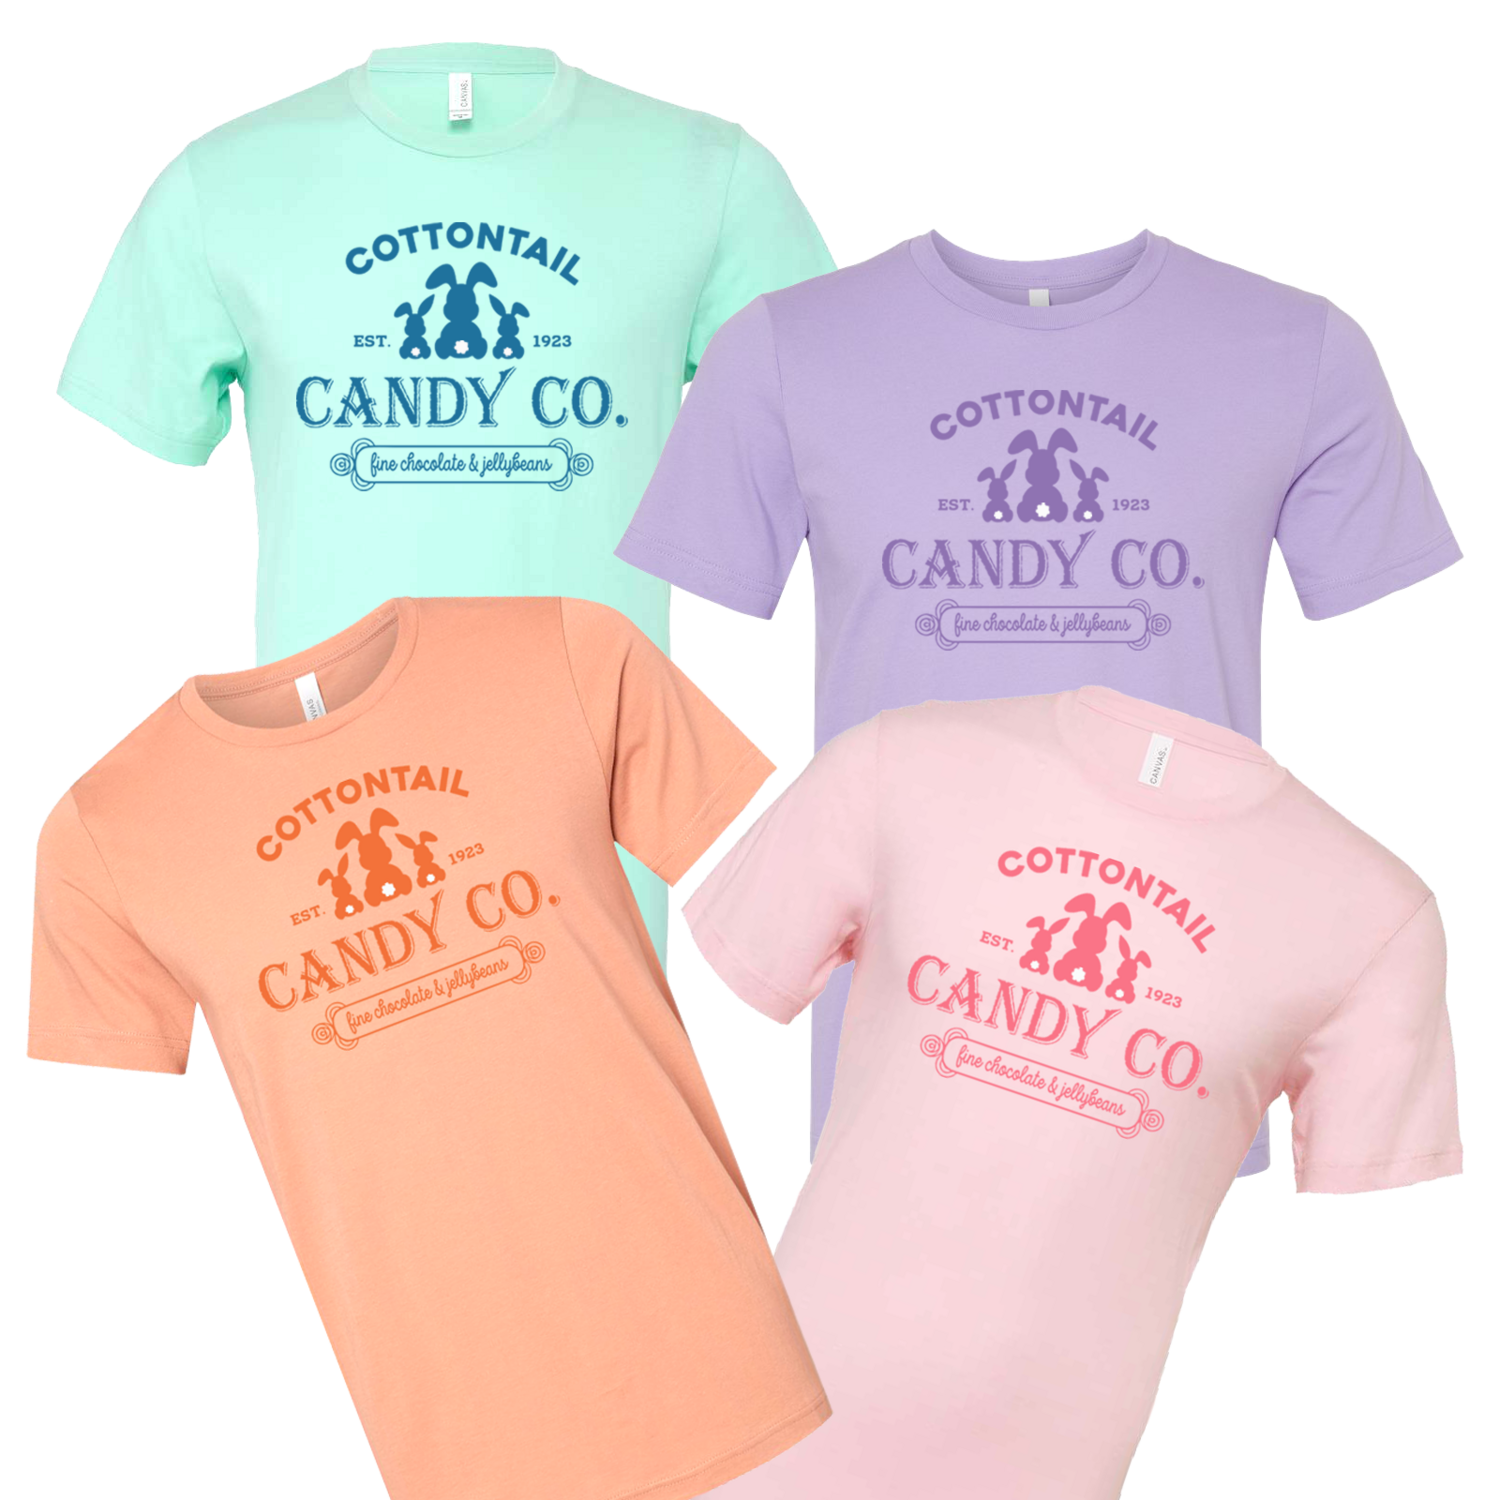 COTTONTAIL CANDY CO